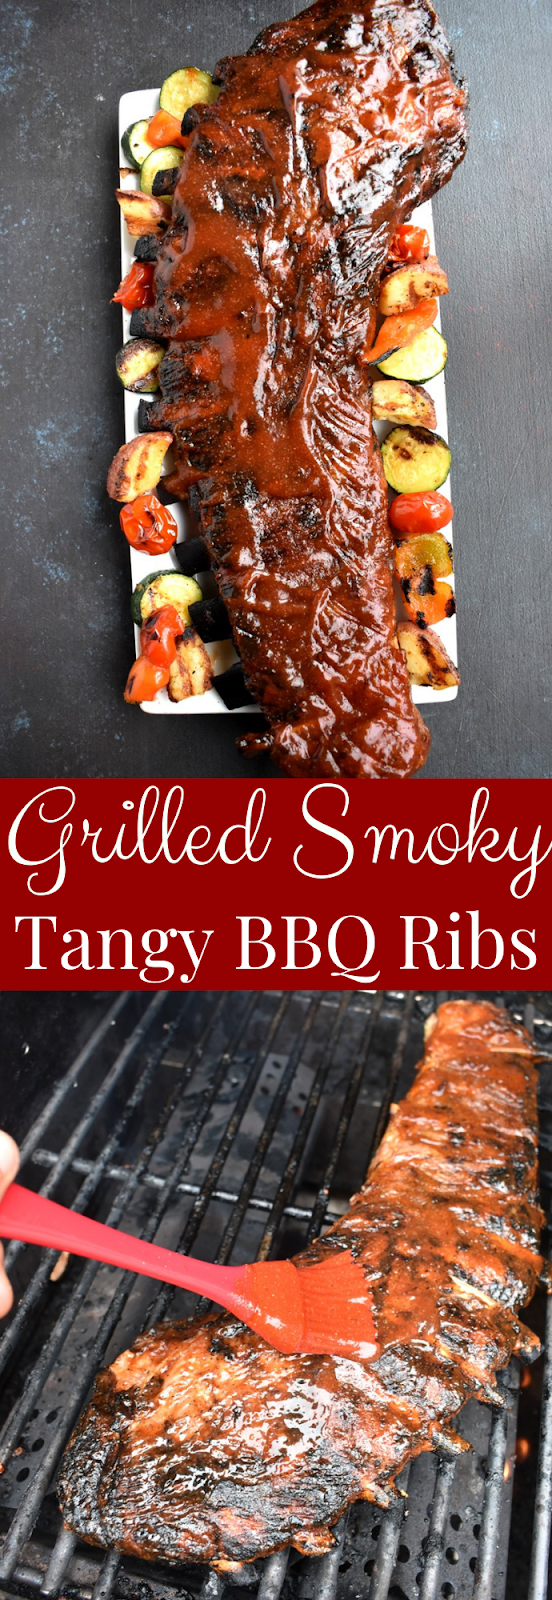 Grilled Smoky Tangy BBQ Ribs recipe